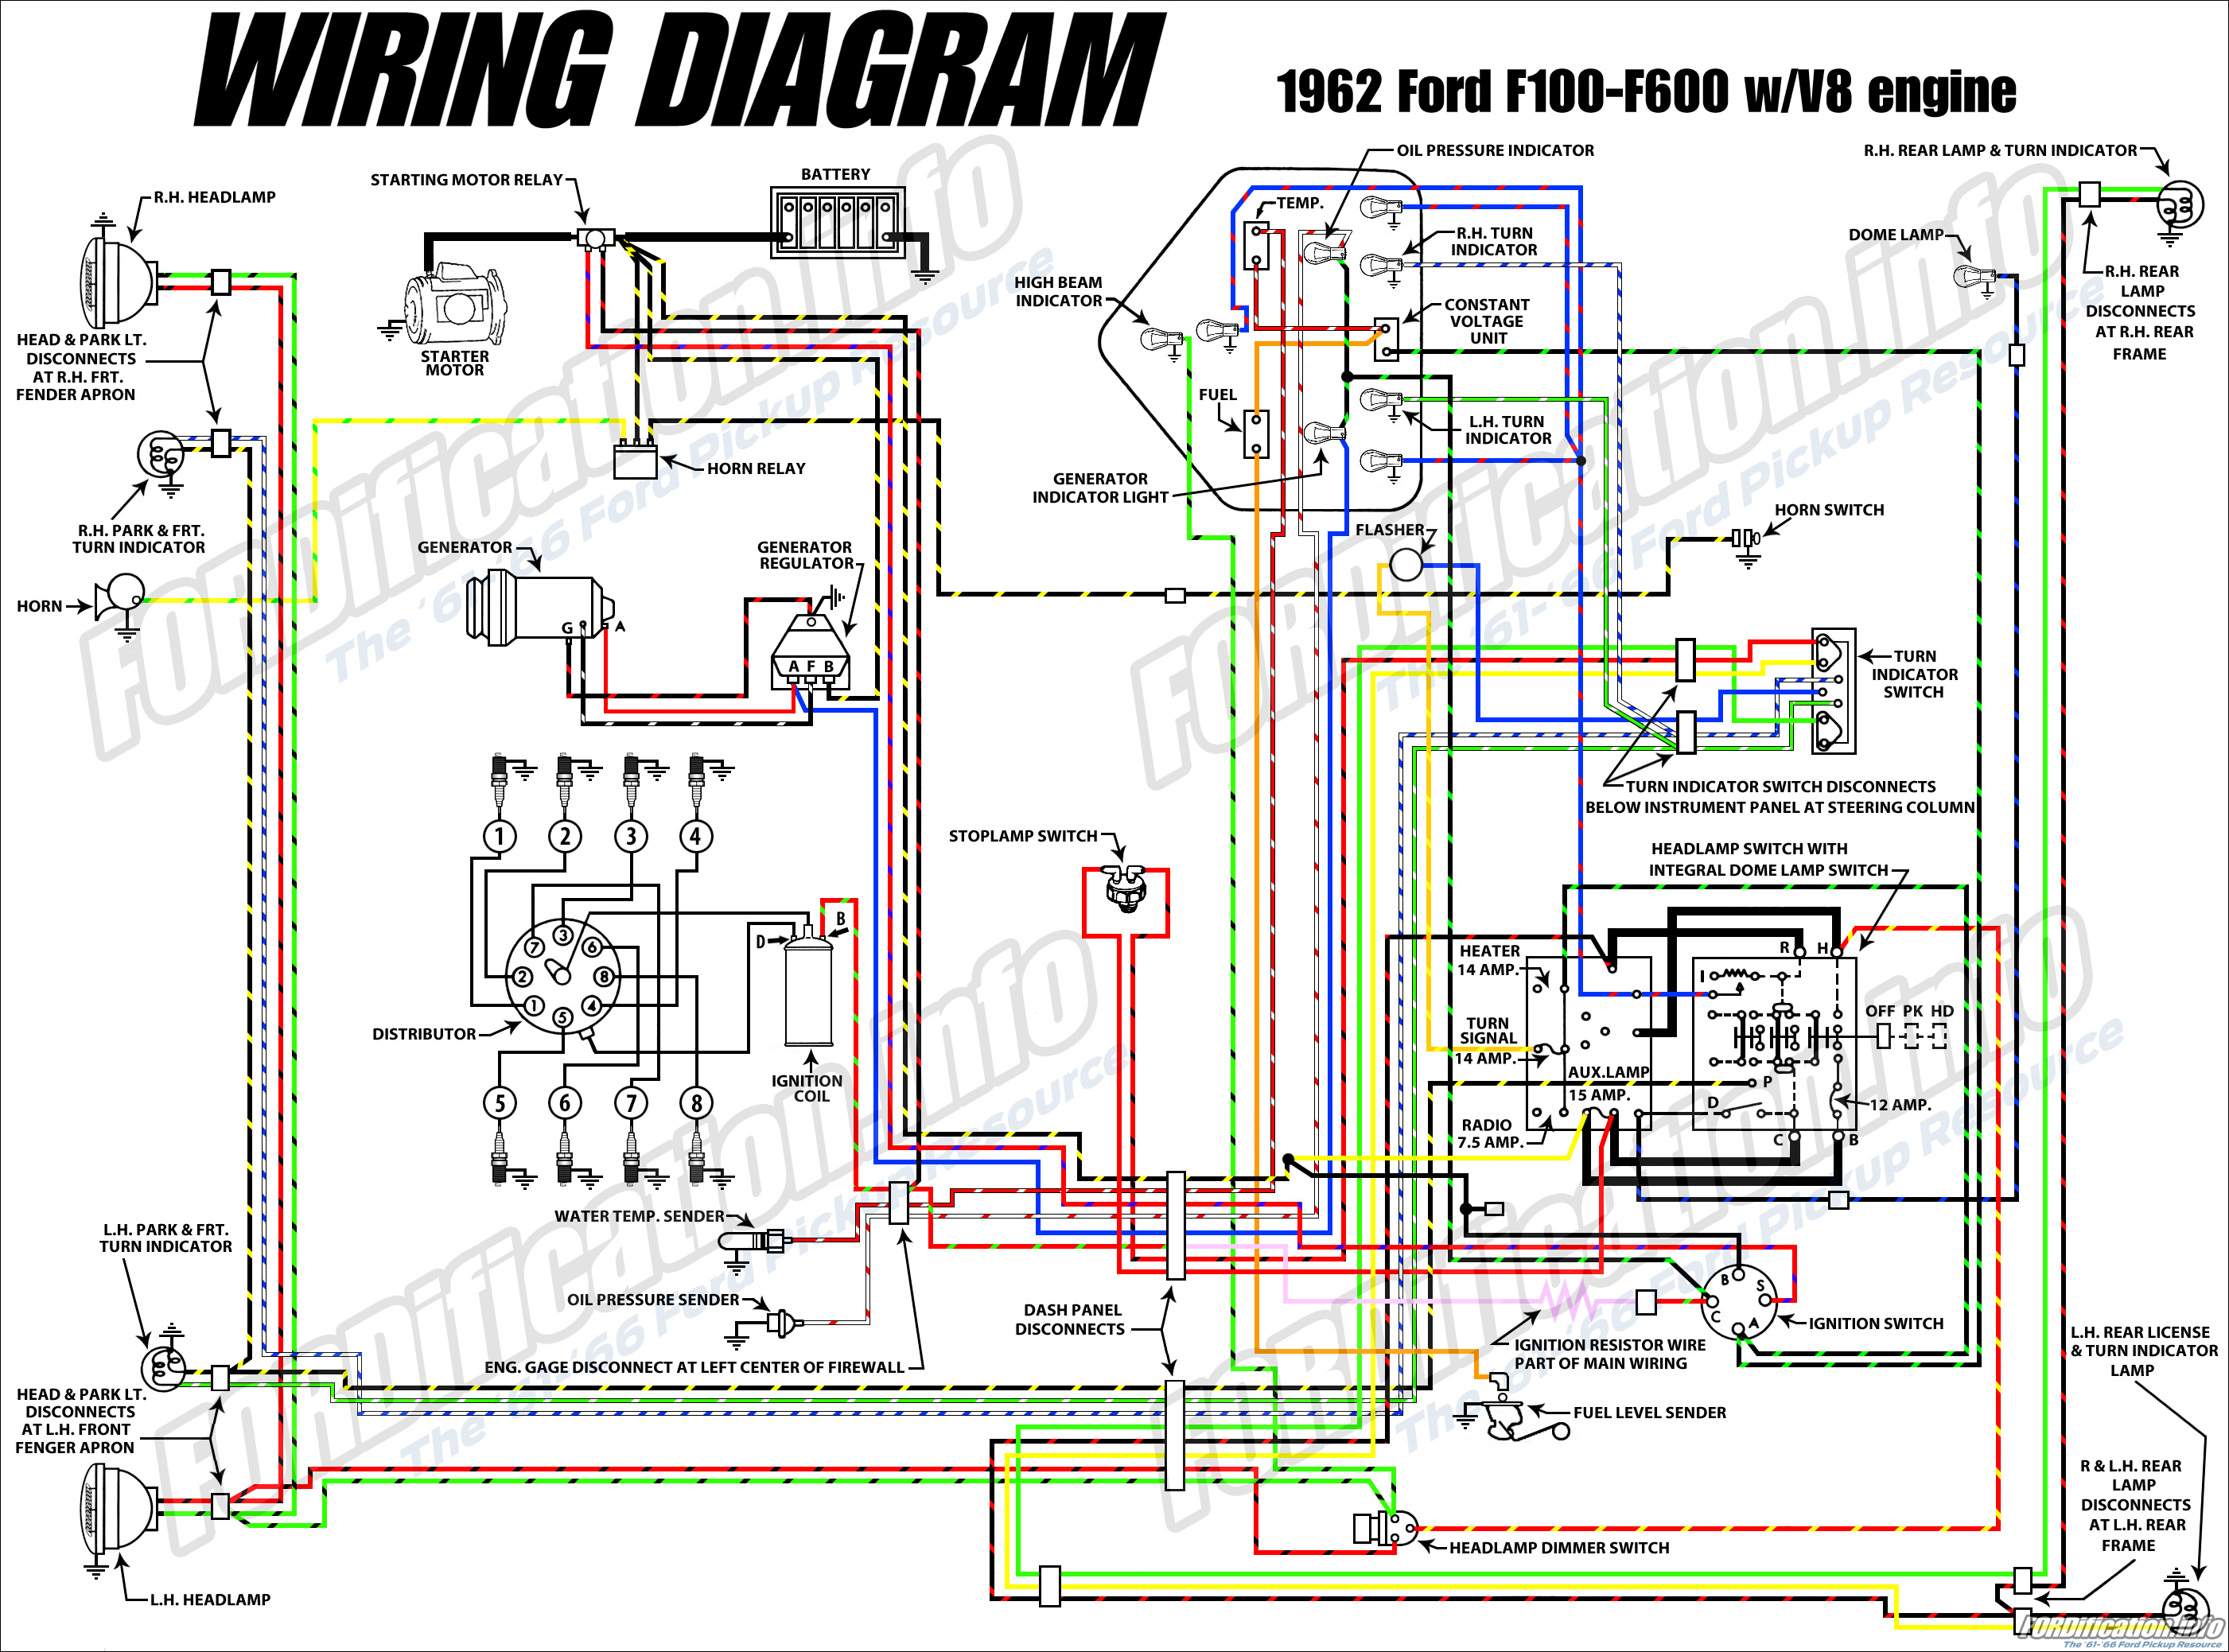 66 f100 cab light wiring - Ford Truck Enthusiasts Forums 1953 ford f100 wiring schematics 